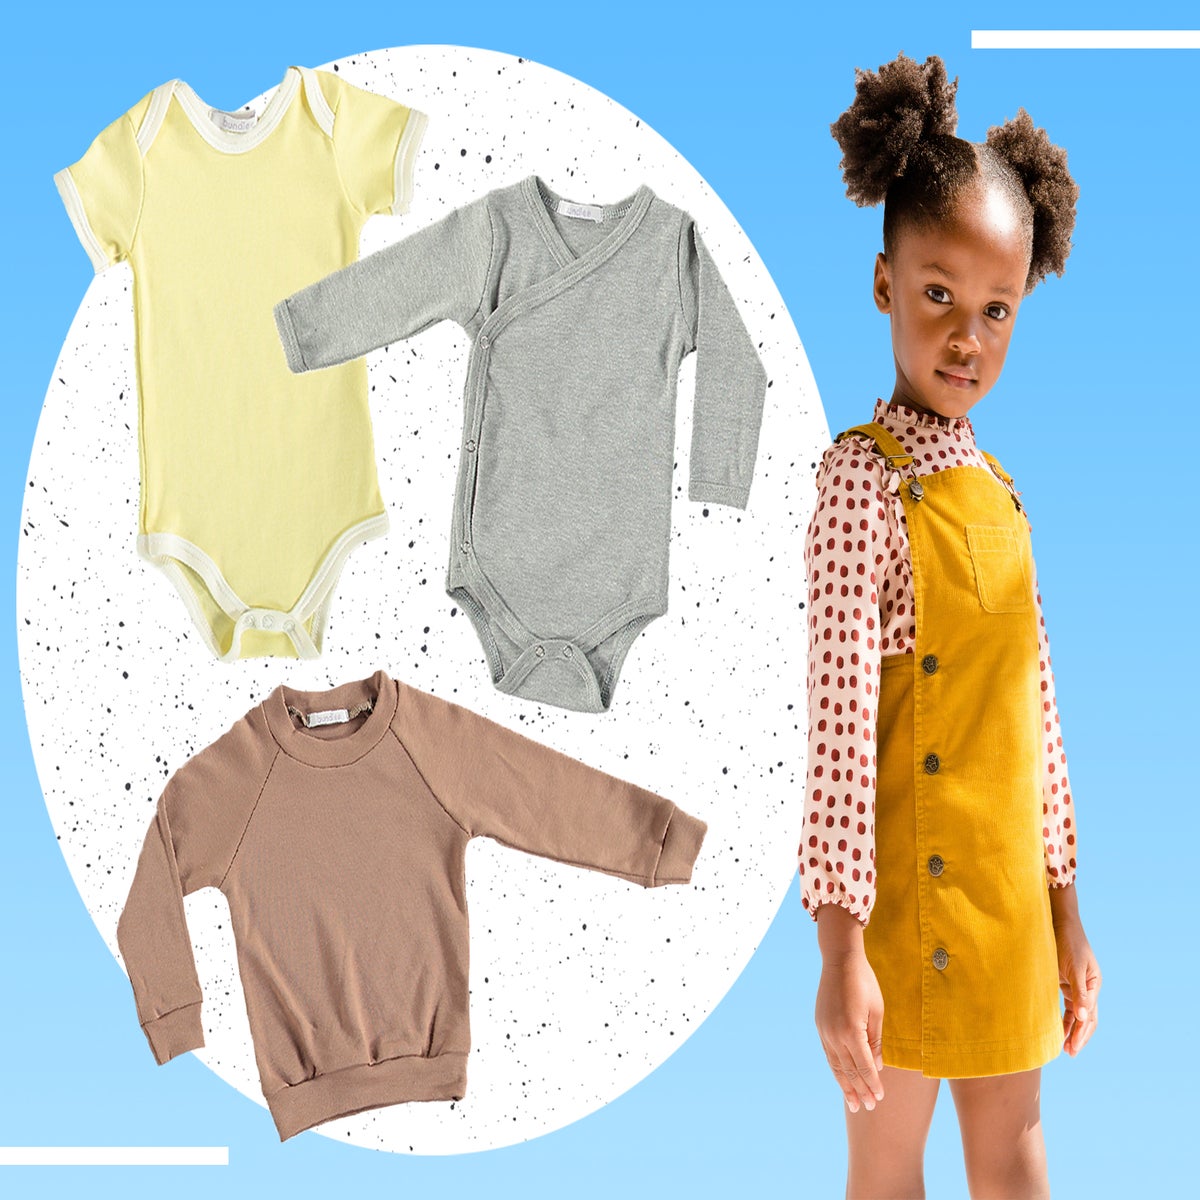 Best kids' clothes rental services: Save cash, space and waste